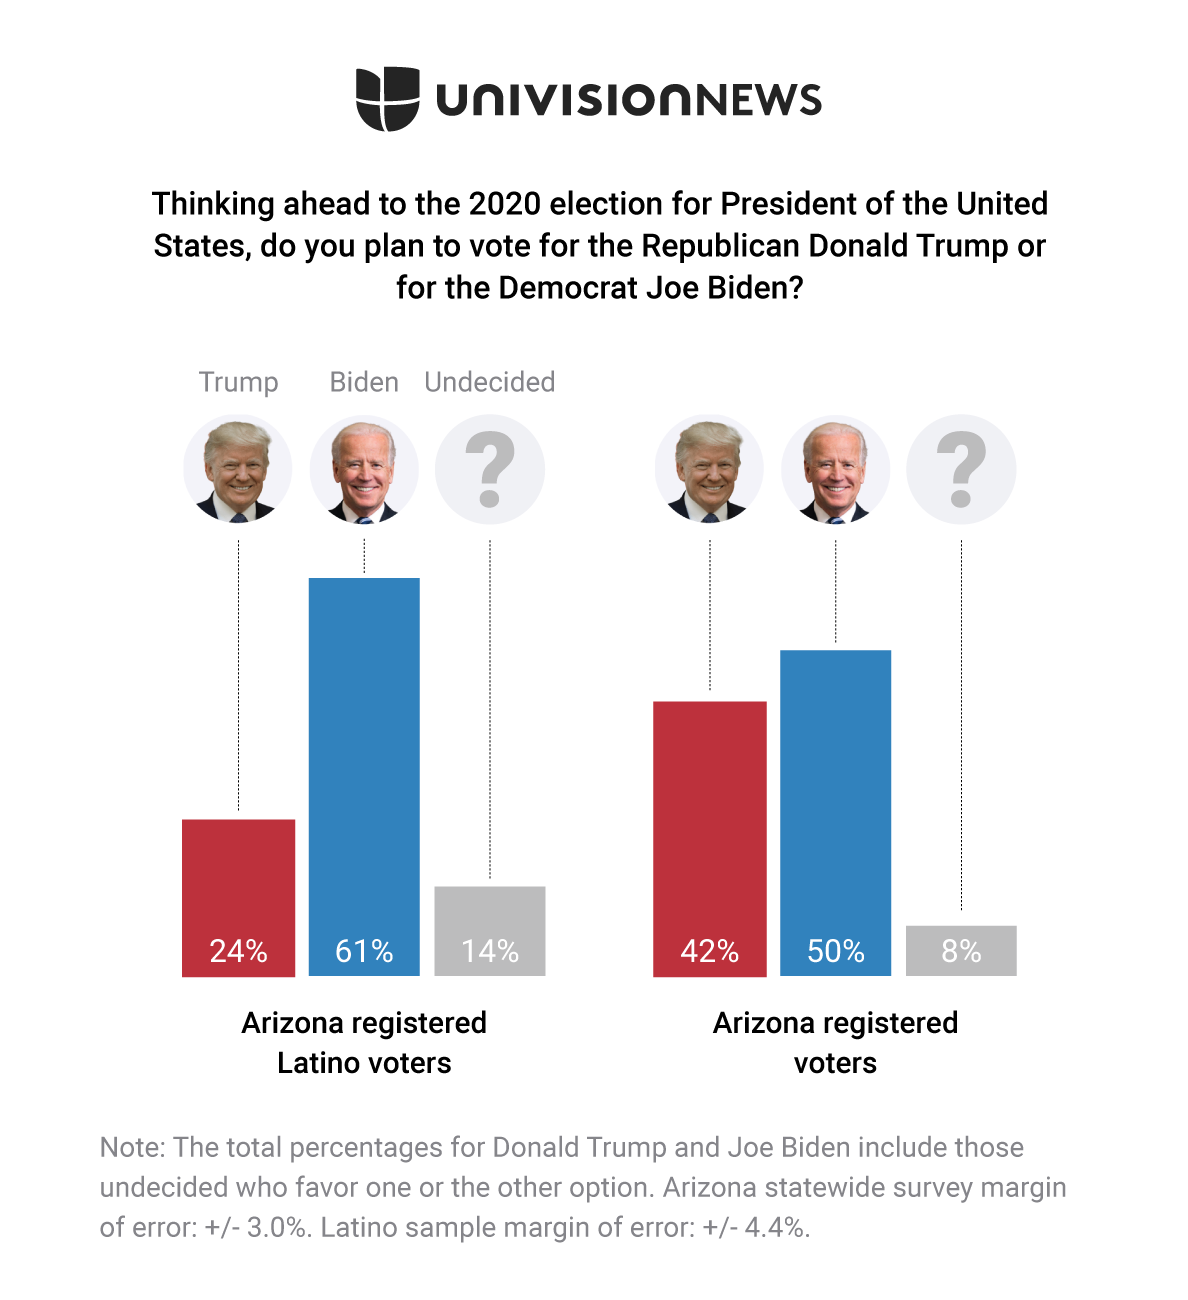 Univision Publishes Complete Results of its Arizona Electoral Polls